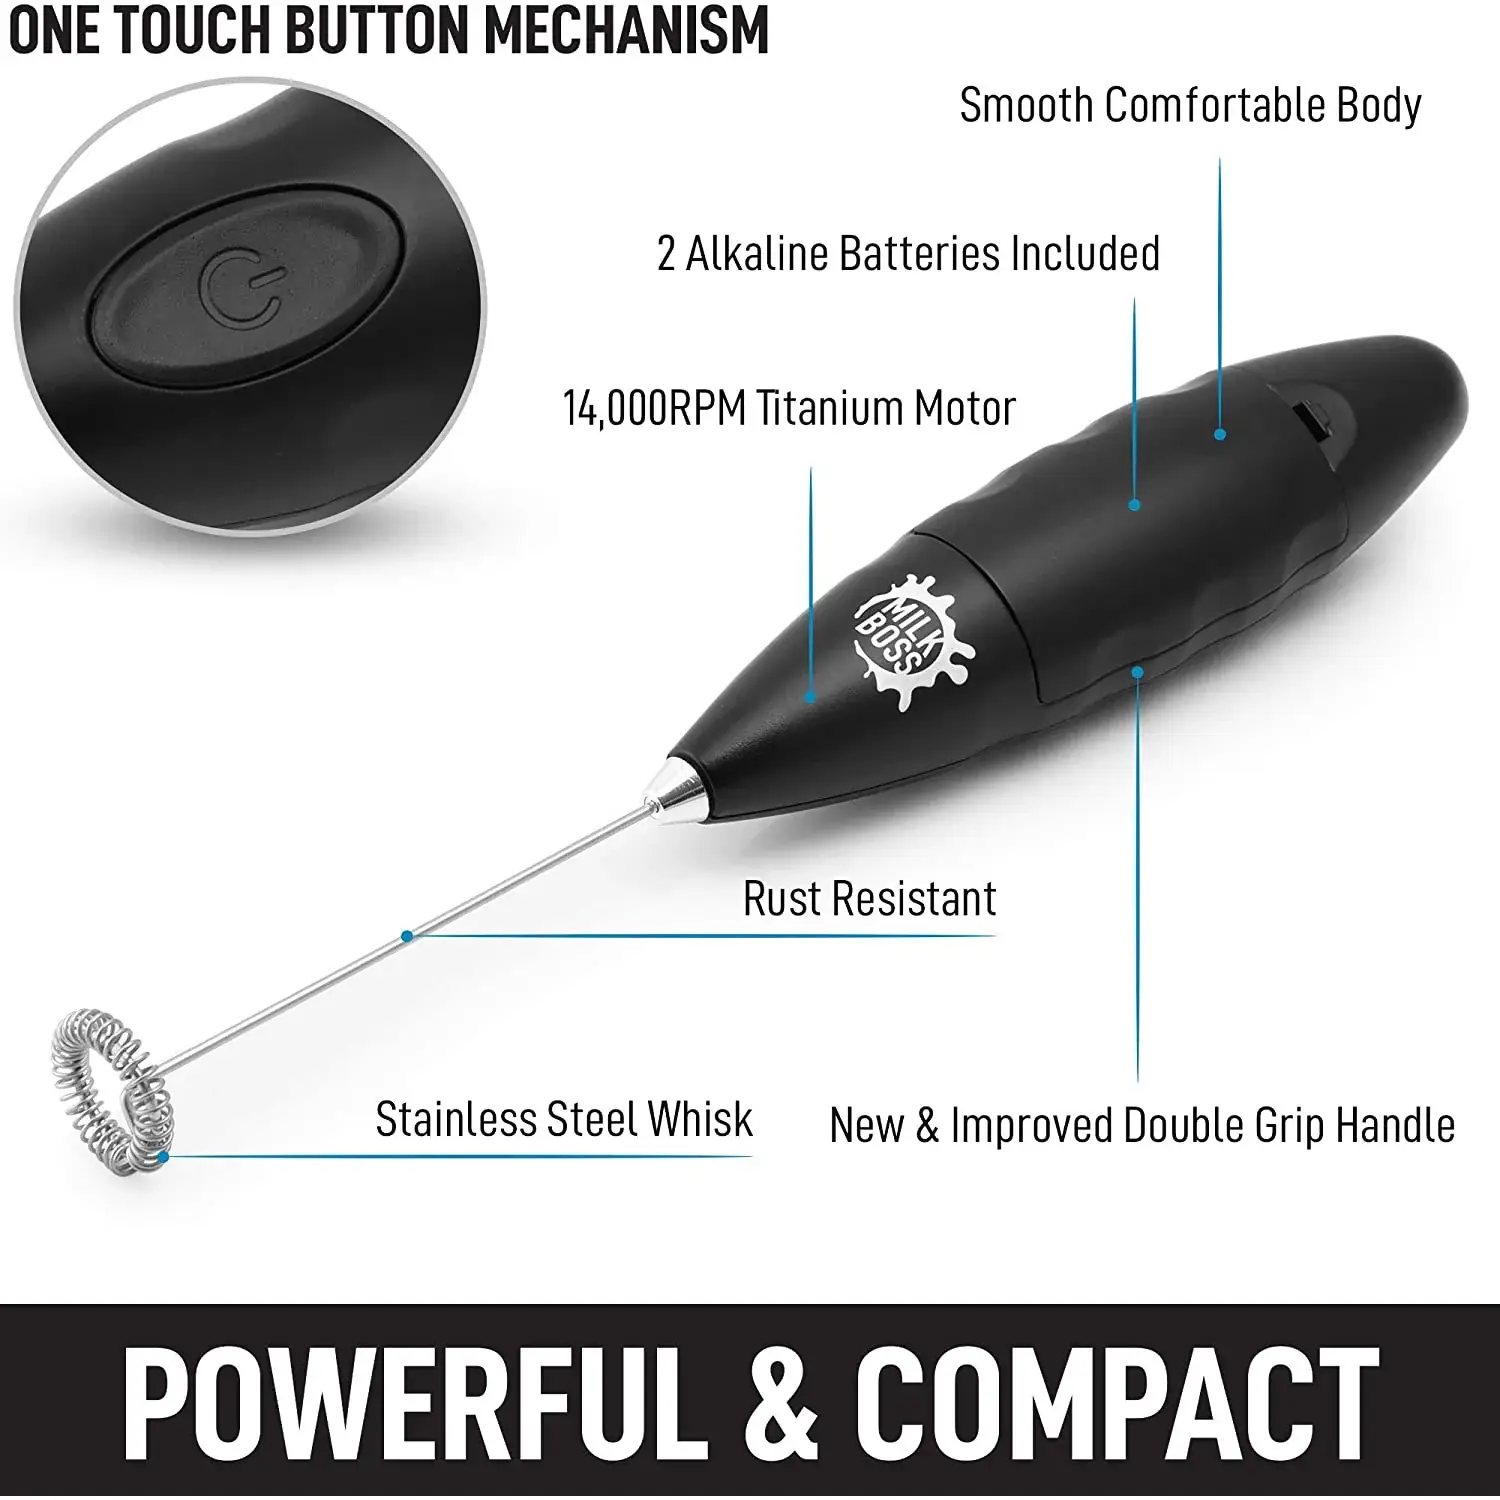 Milk Boss Milk Frother - Double Grip (Batteries Included)